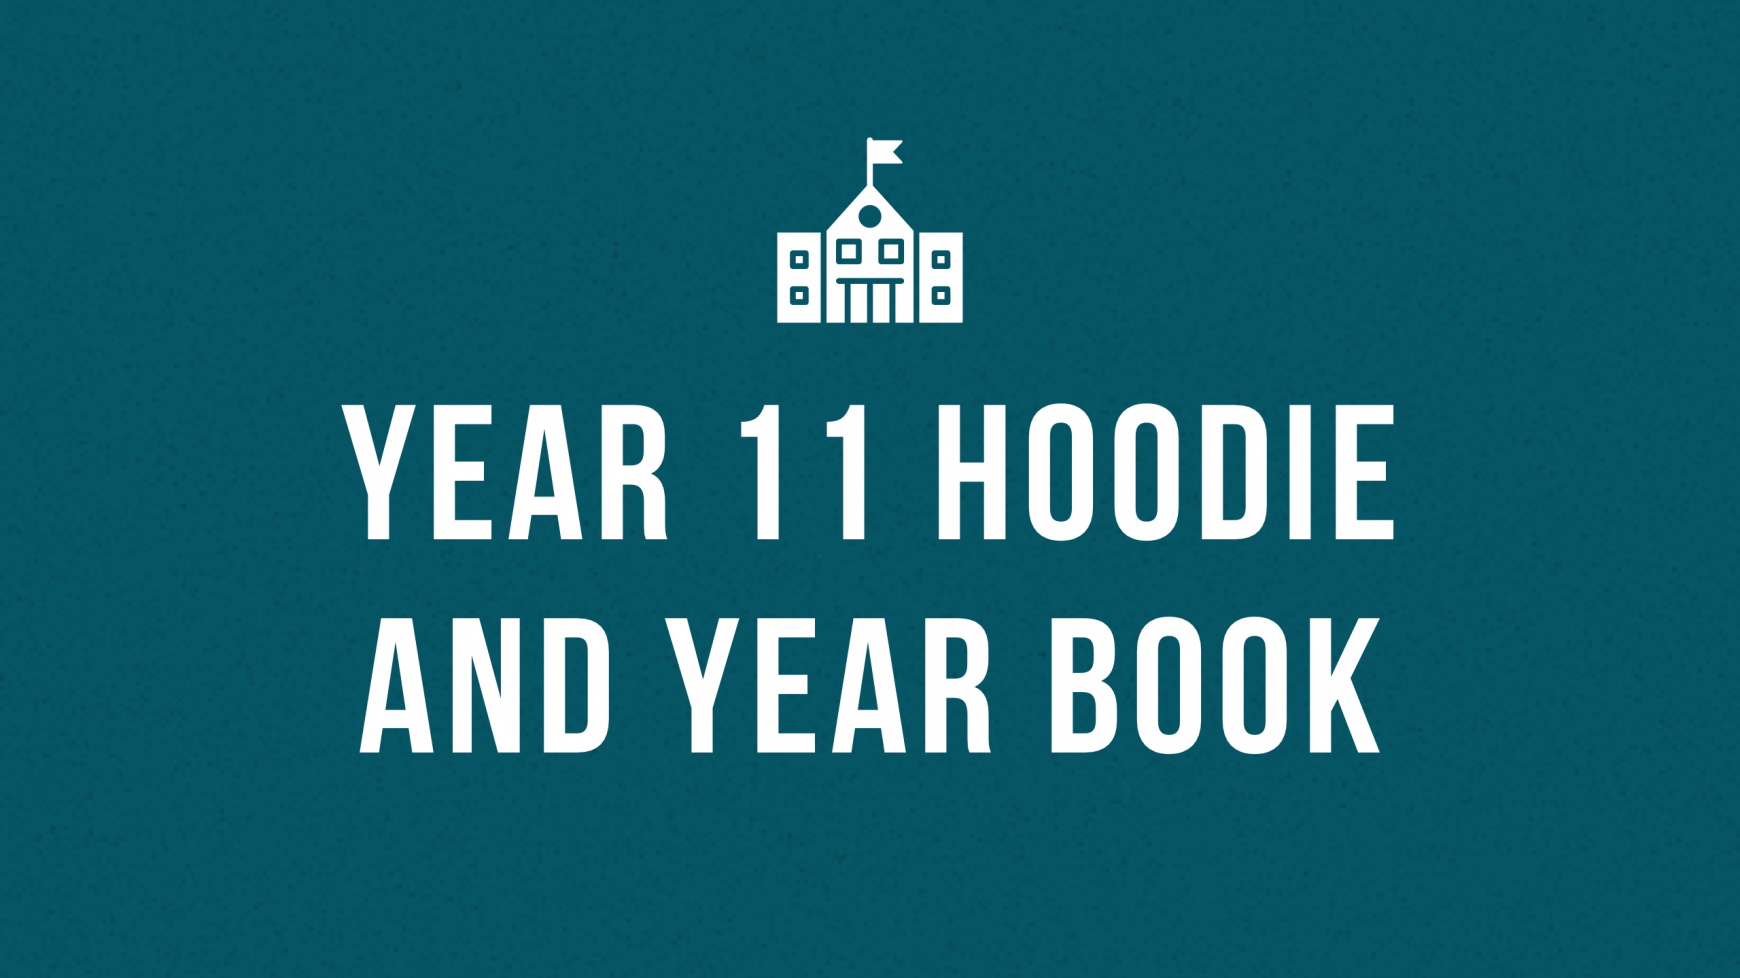 Year 11 Hoodie and Year Book